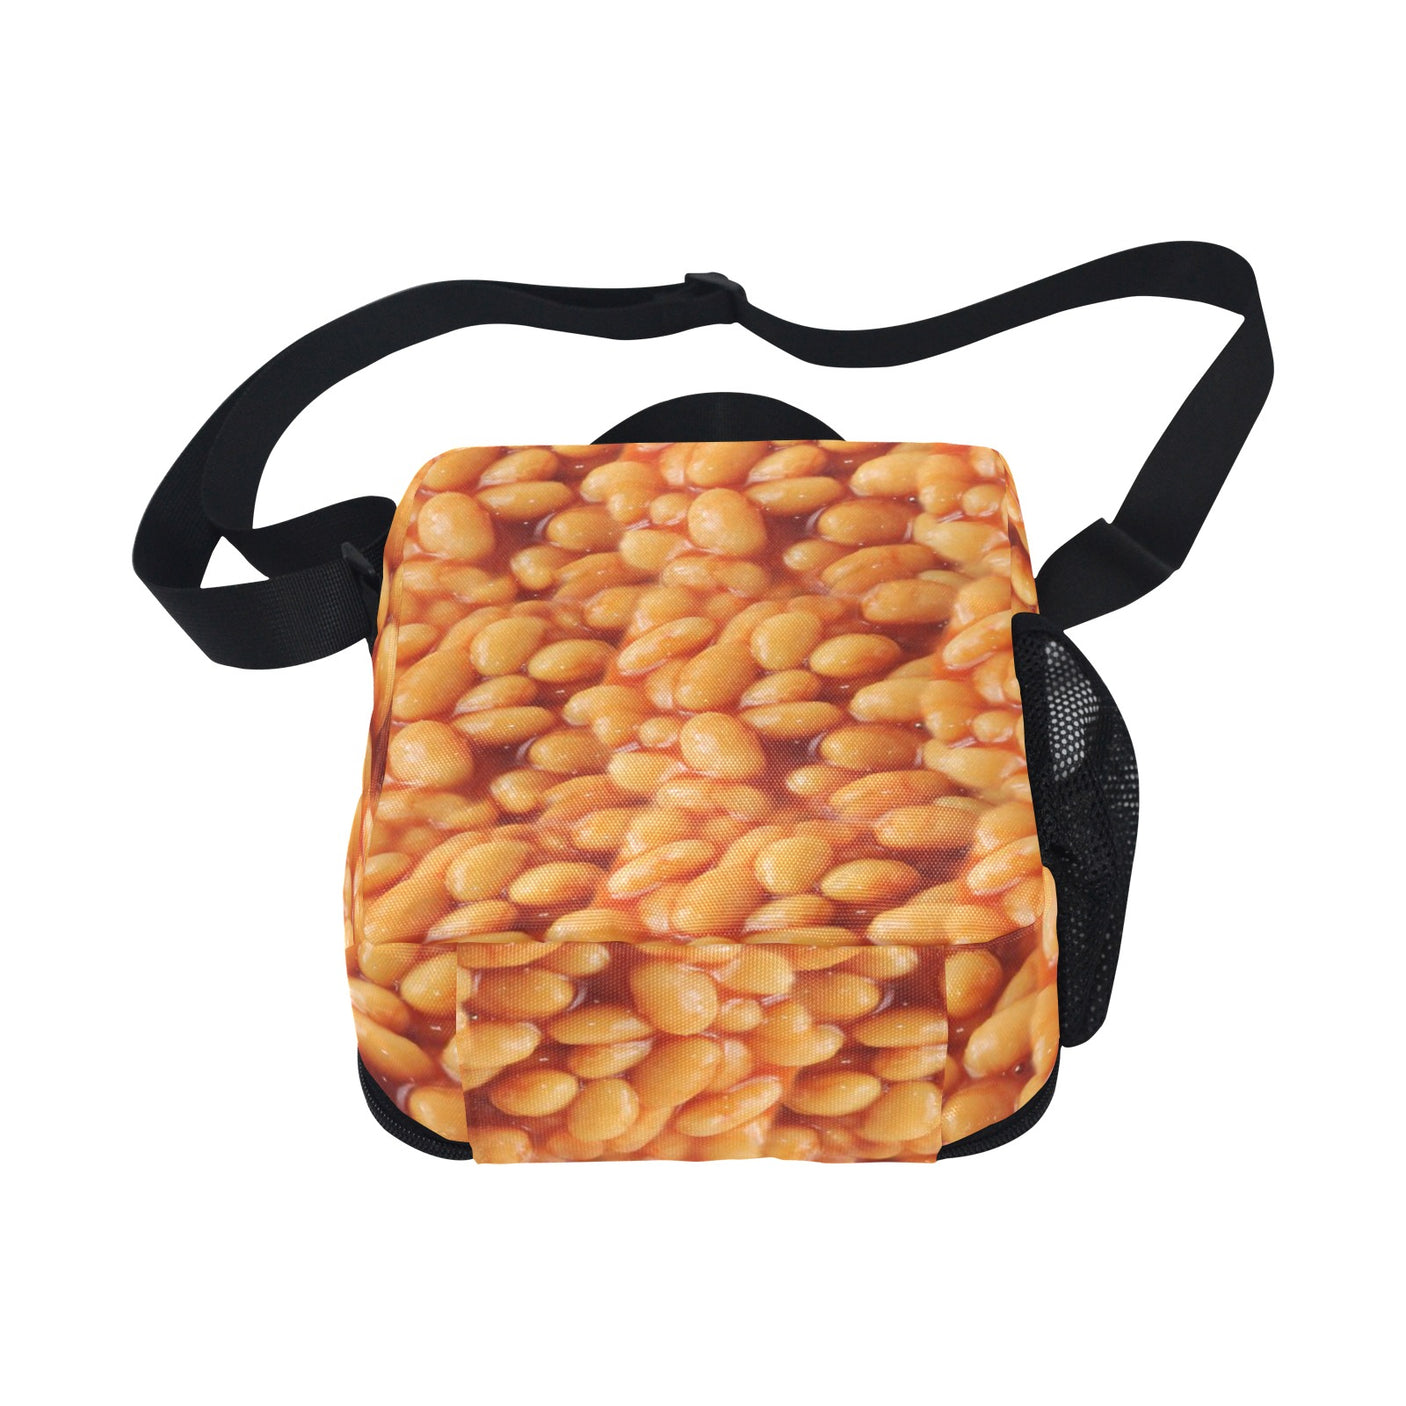 Baked Beans Lunch Box Bag